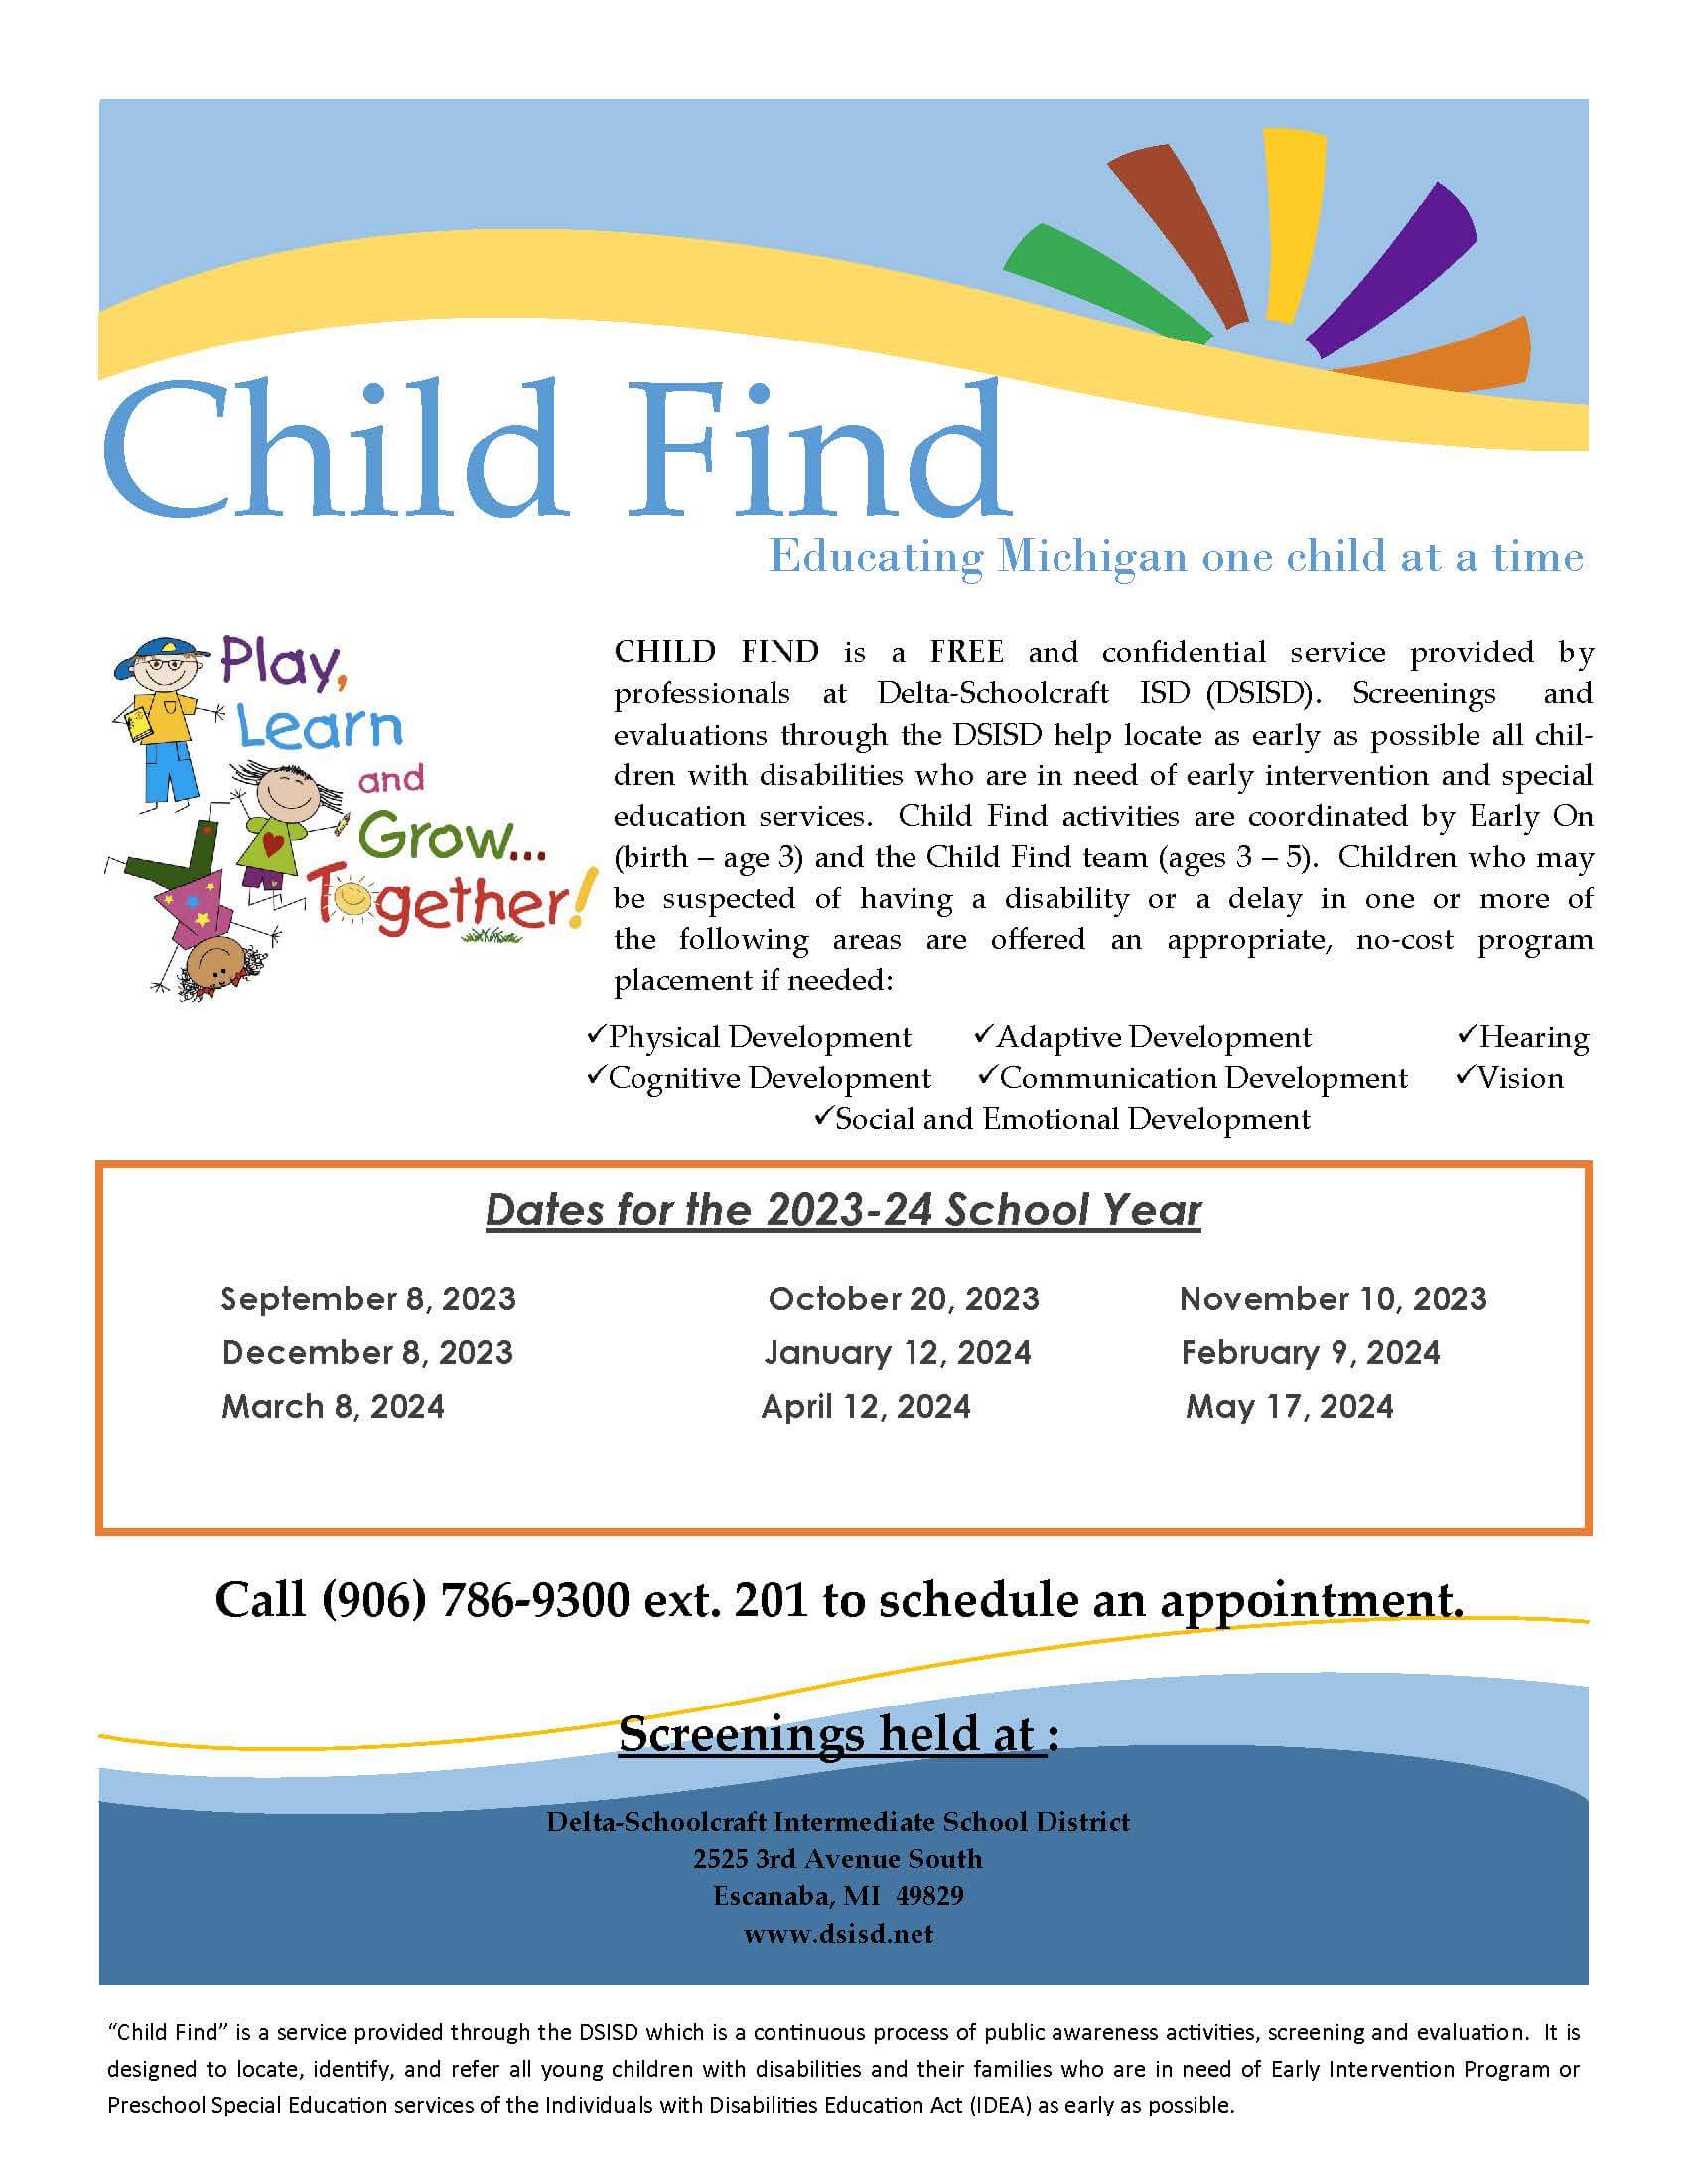 Child Find-Educating Michigan one child at a time. Child Find is a free and confidential service provided by professionals at Delta-Schoolcraft ISD (DSISD). Screenings and evaluations through the DSISD help locate as early as possible all children with disabilities who are in need of early intervention and special education services. Child Find activities are coordinated by Early On (birth-age3) and the Child Find team (ages 3-5). Children who may be suspected of having a disability or a delay in one or more of the following areas are offered an appropriate, no-cost program placement if needed: Physical Development, Adaptive Development, Hearing, Cognitive Development, Communication Development, Vision, Social and Emotional Development. Remaing dates for 2024 school year. February, 9 2024, March 8, 2024, April 12, 2024, and May 17, 2024. Call 906-786-9300, extension 201 to schedule an appointment. Screenings held at: Delta-Schoolcraft Intermediate School District, 2525 23rd Avenue South, Escanaba, Mi 49829; www.dsisd.net